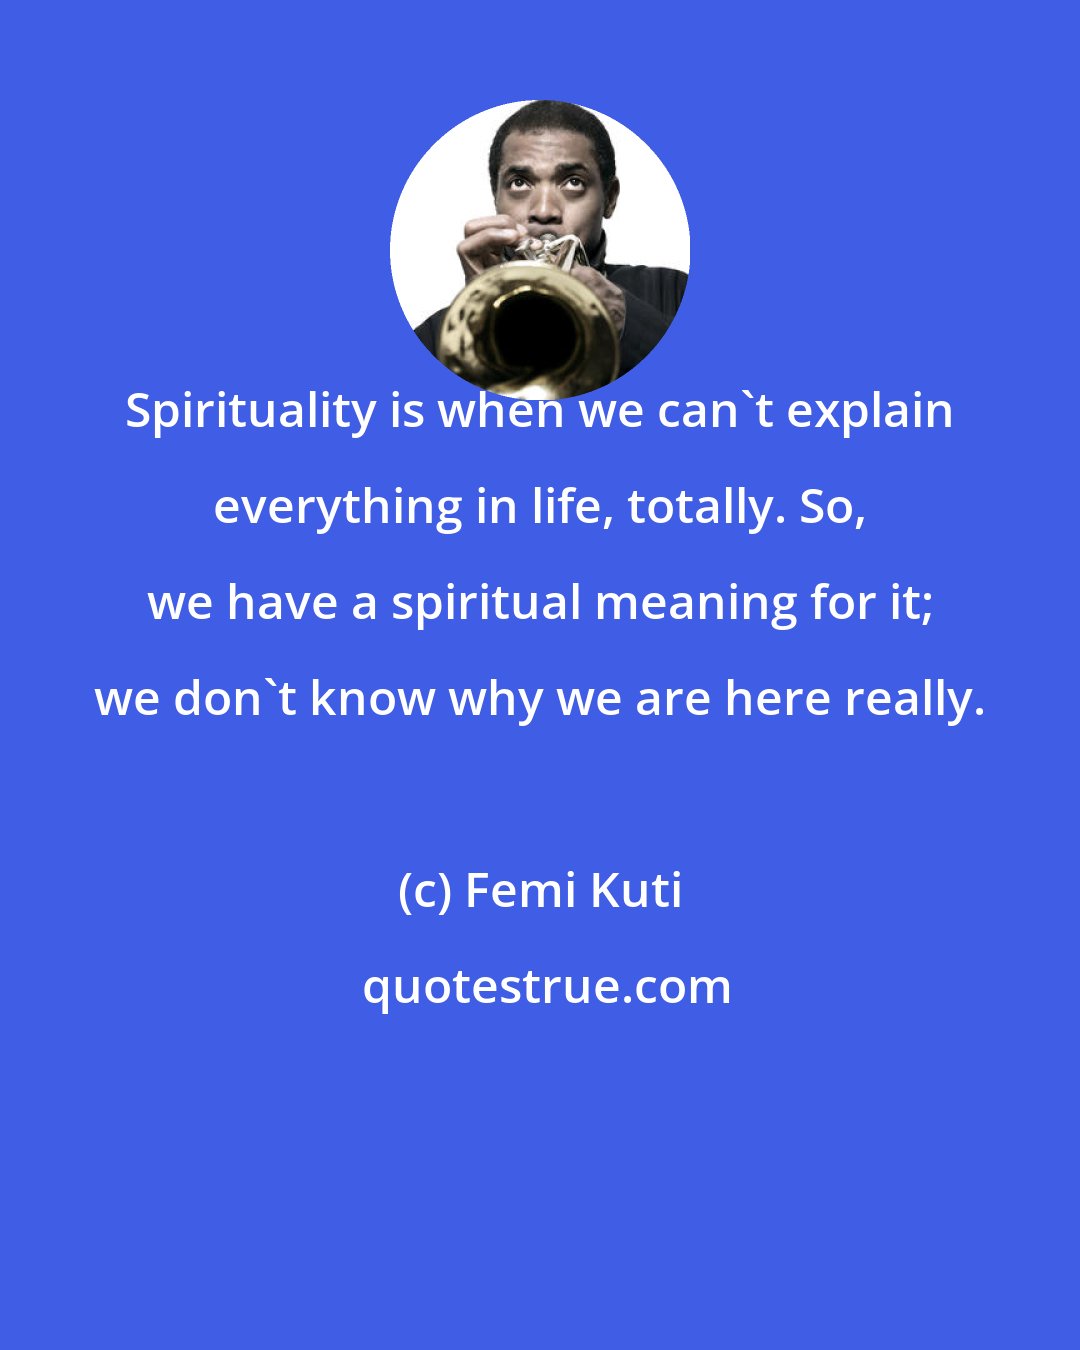 Femi Kuti: Spirituality is when we can't explain everything in life, totally. So, we have a spiritual meaning for it; we don't know why we are here really.